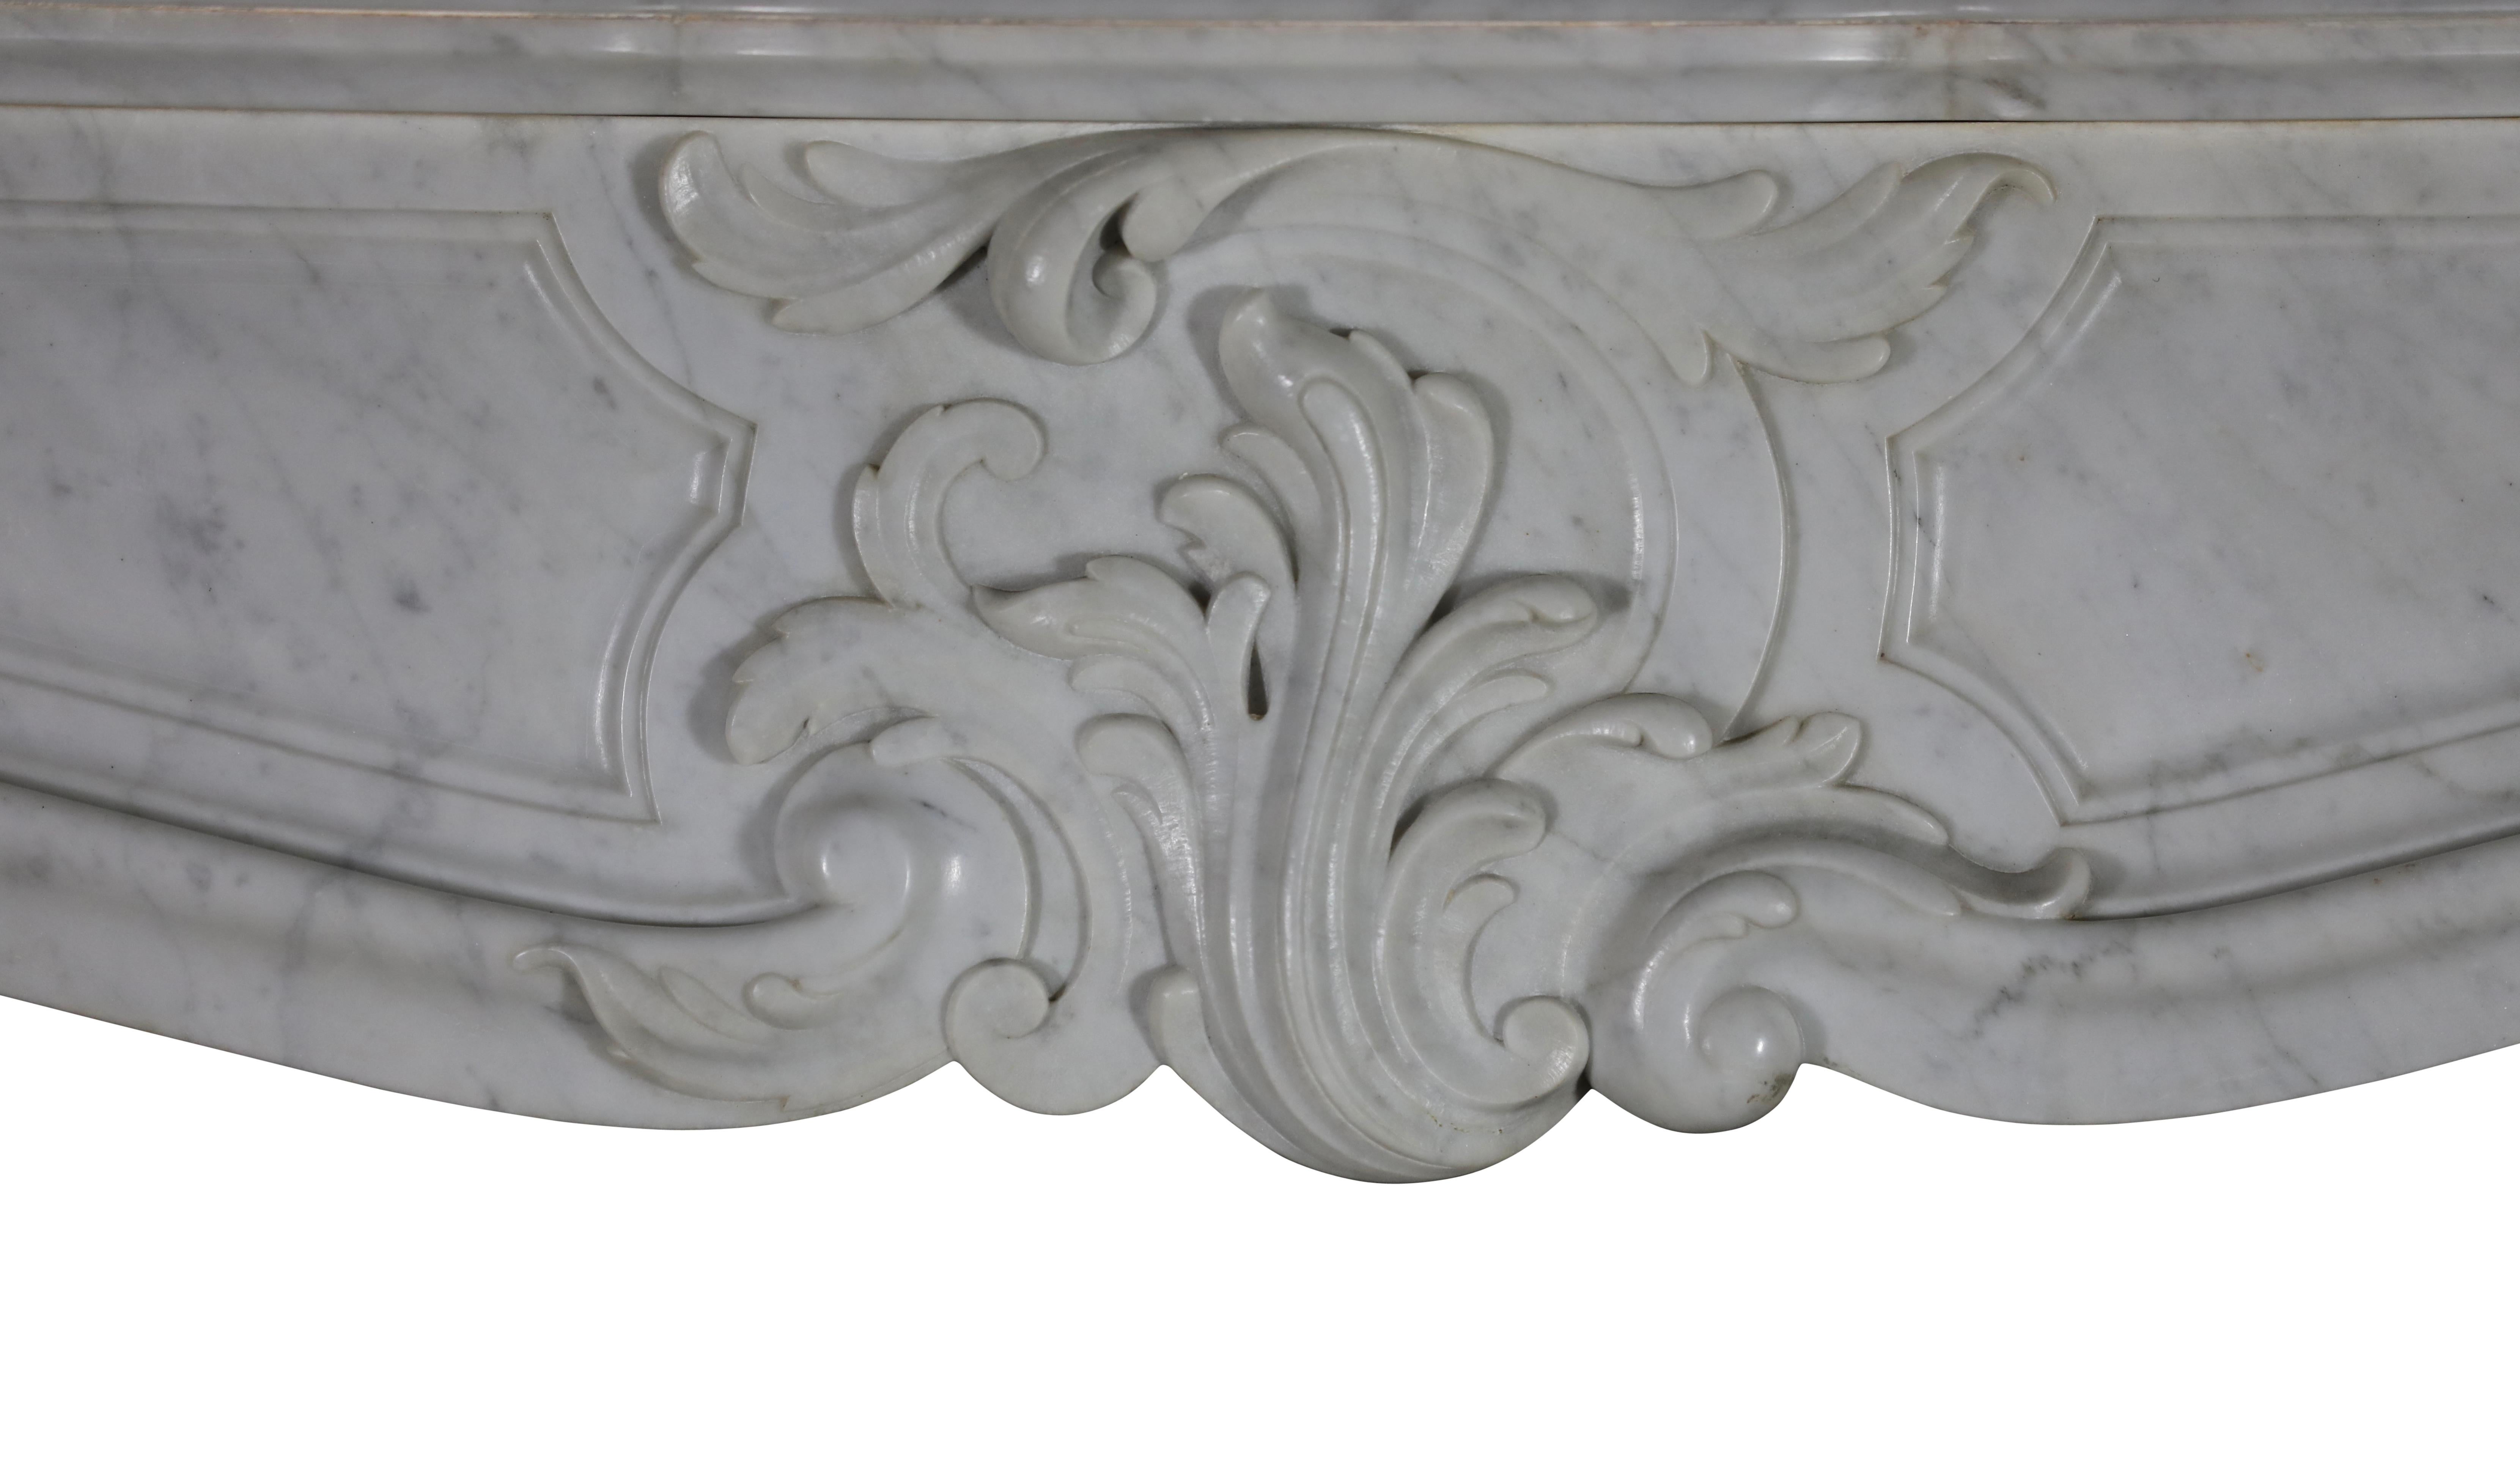 Belgian Exquisite Antique White Marble Fireplace Surround For Sale